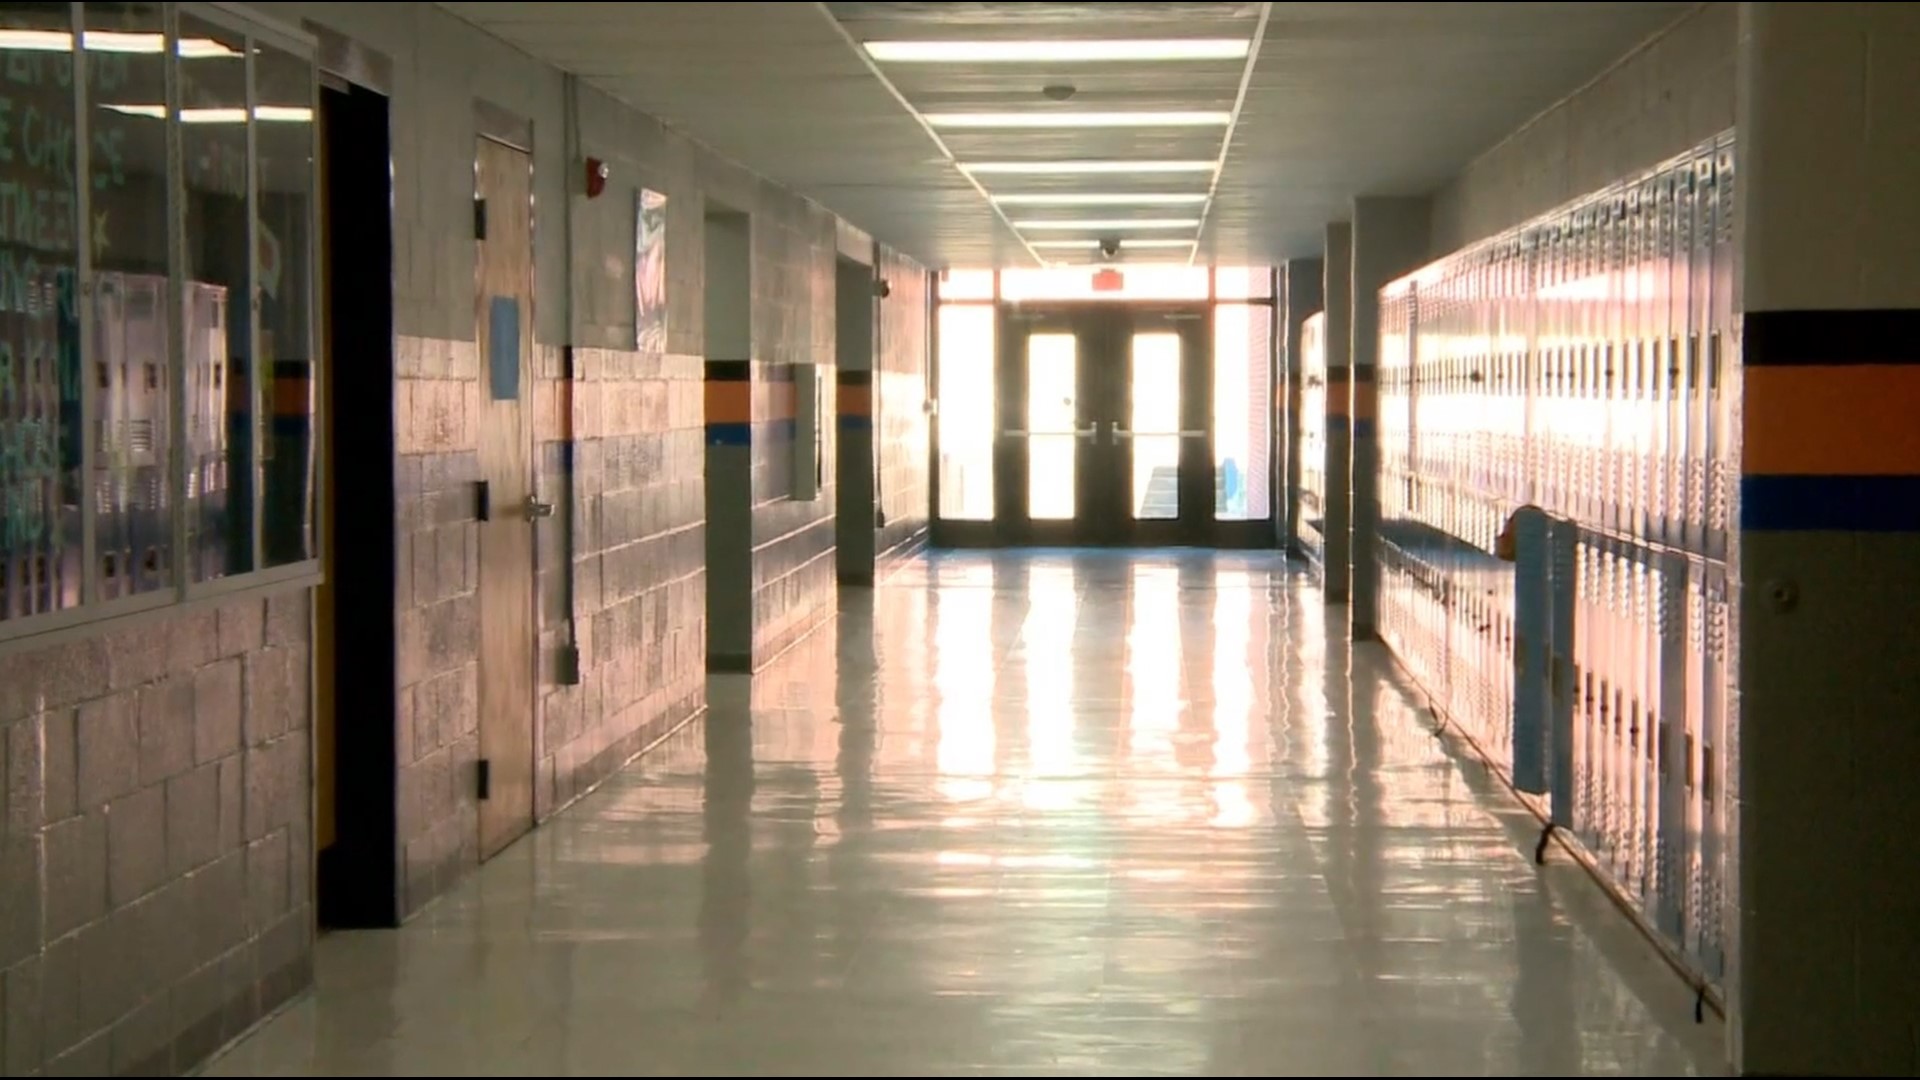 Knox County is considering hiring outside help in response to a shortage of custodians to keep schools clean and sanitized.